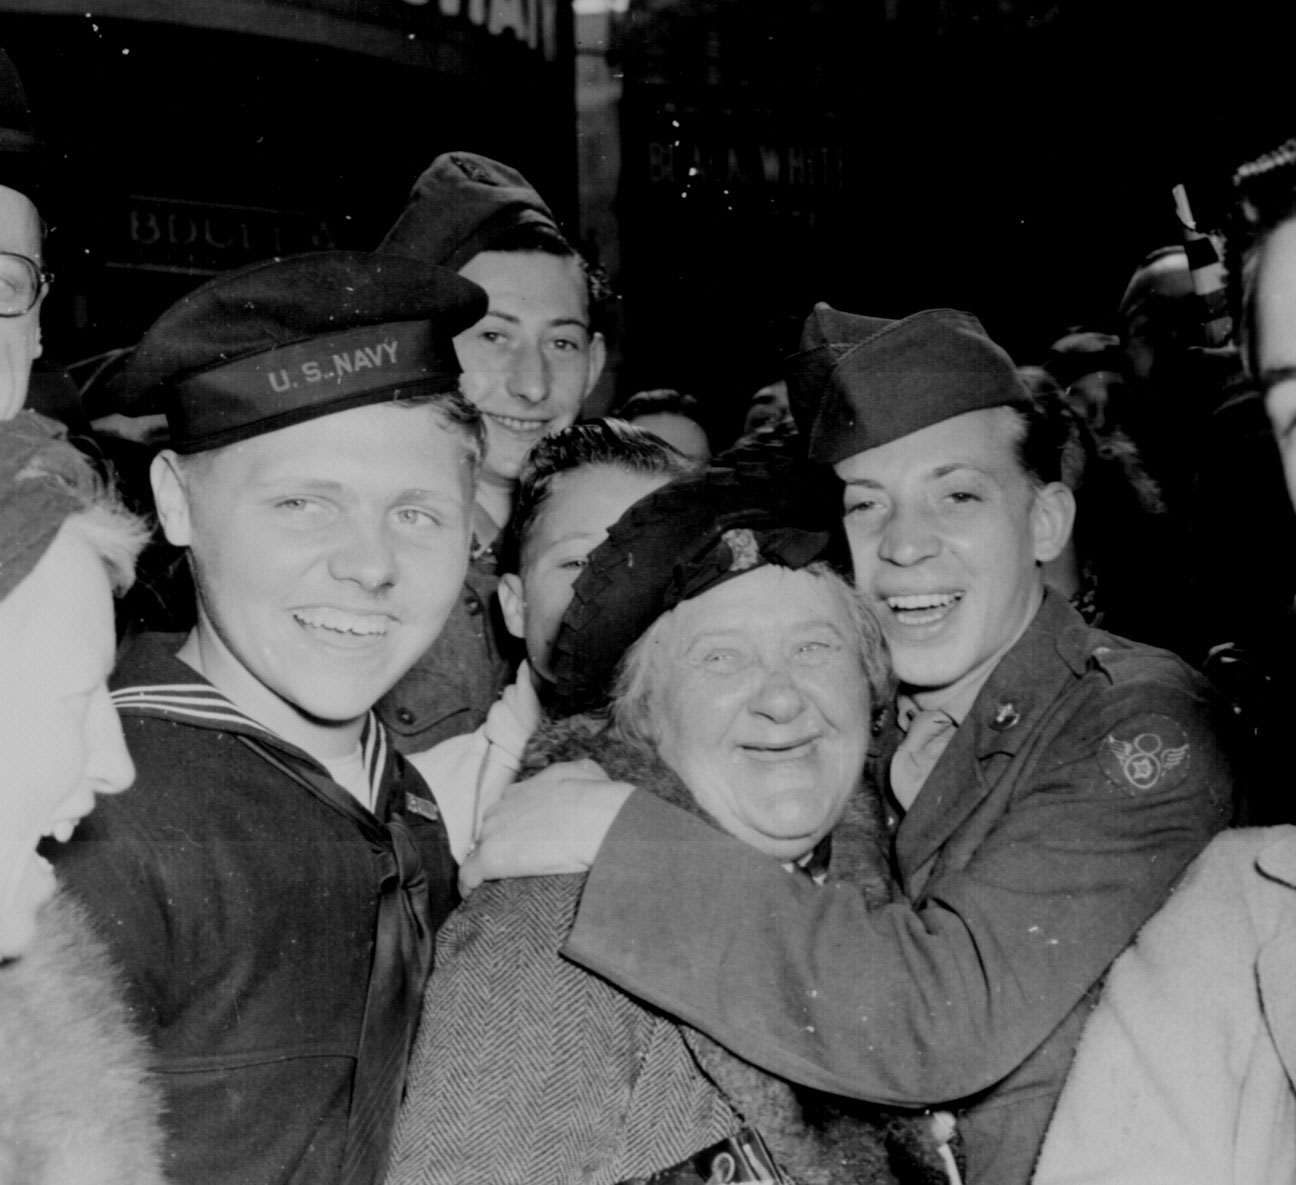 A jubilant American airman hugging an English woman at Piccadilly Circus, London, England, United Kingdom, celebrating Germany's unconditional surrender, 7 May 1945